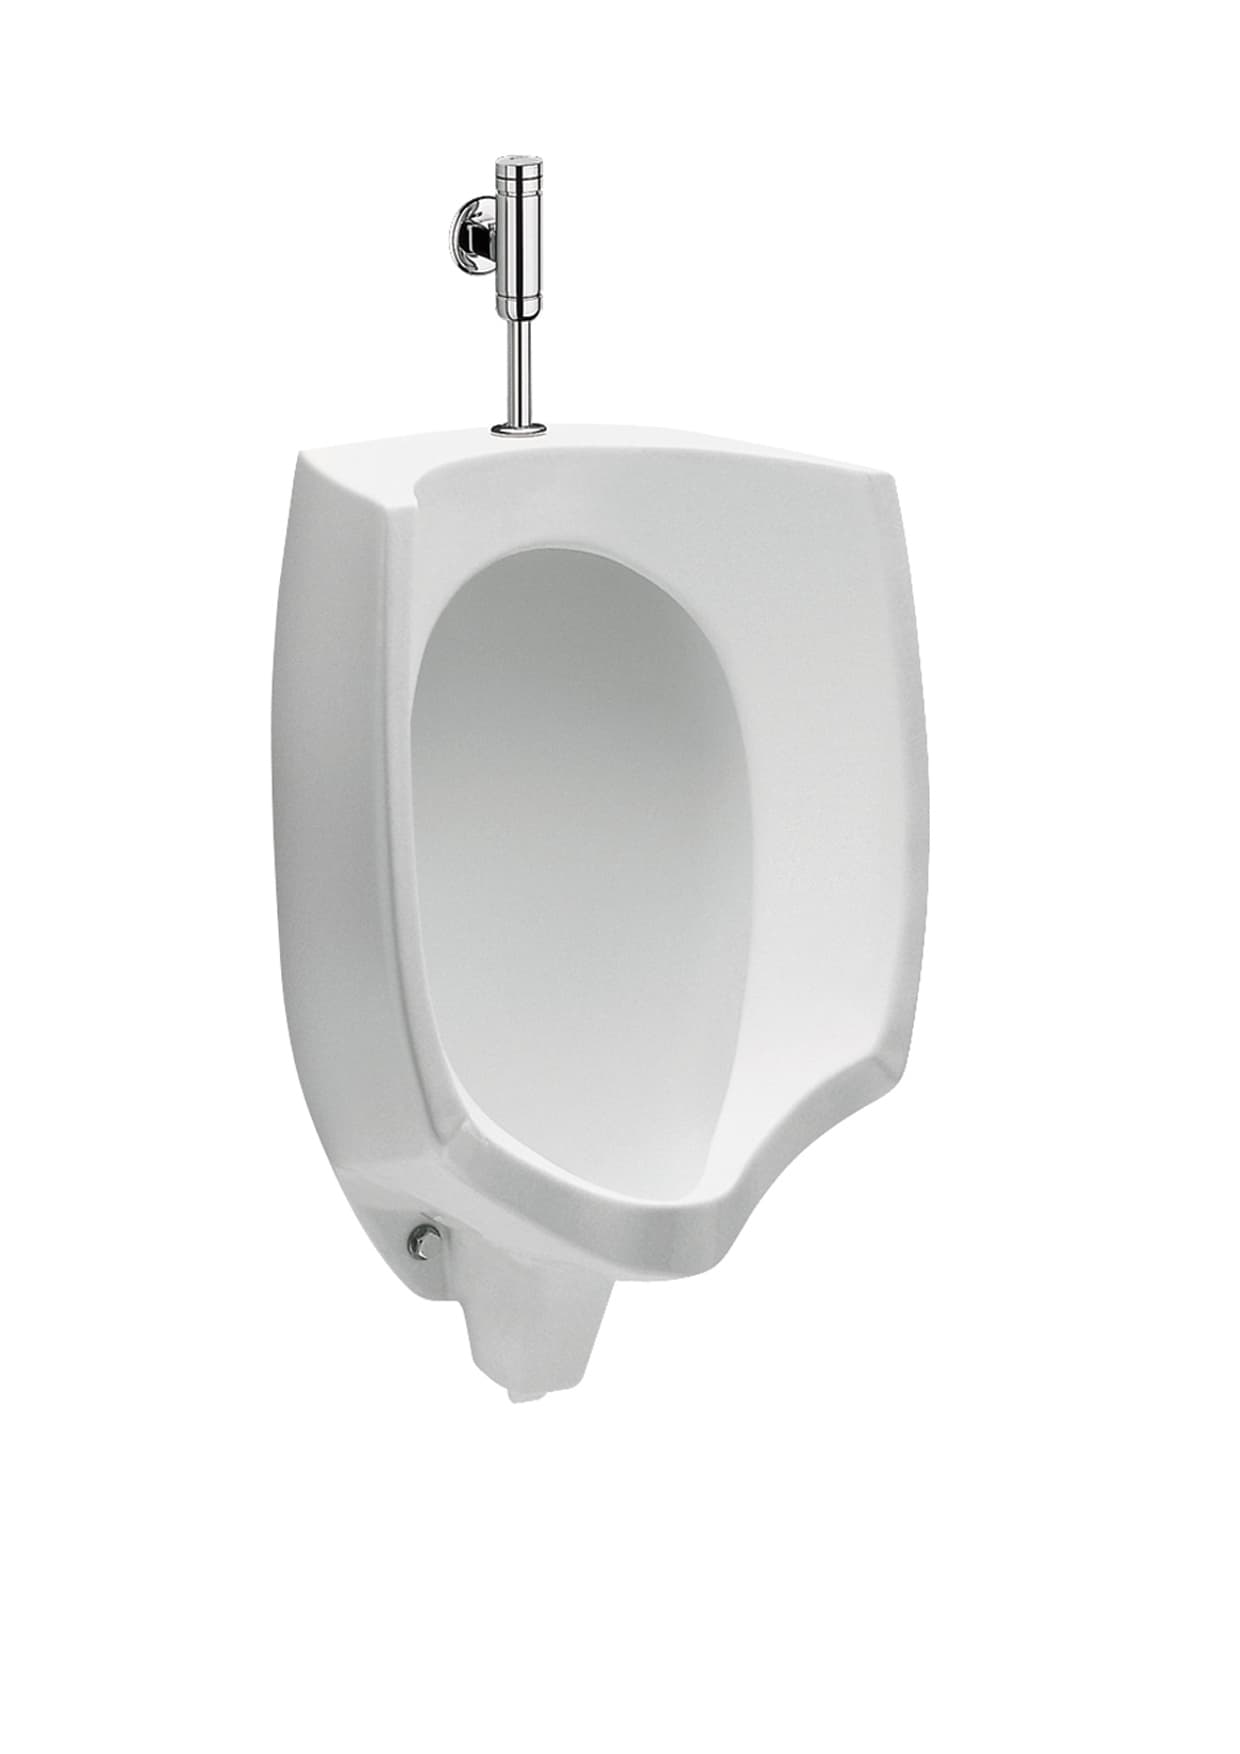 Vitreous china urinal with a top inlet-MURAL